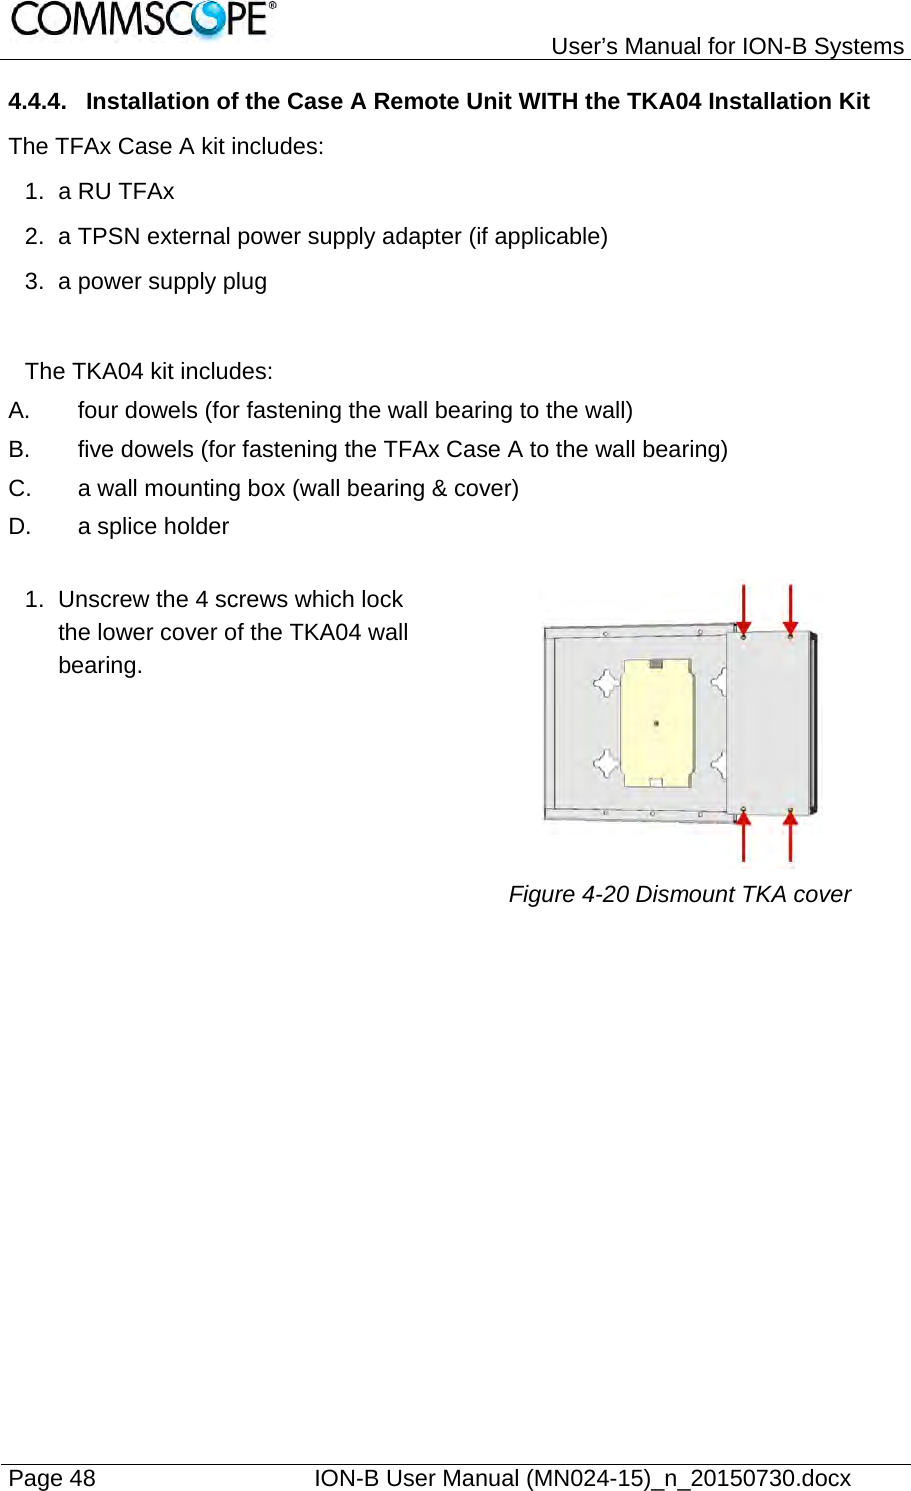   User’s Manual for ION-B Systems Page 48    ION-B User Manual (MN024-15)_n_20150730.docx  4.4.4.  Installation of the Case A Remote Unit WITH the TKA04 Installation Kit The TFAx Case A kit includes: 1. a RU TFAx 2.  a TPSN external power supply adapter (if applicable) 3.  a power supply plug  The TKA04 kit includes: A.  four dowels (for fastening the wall bearing to the wall) B.  five dowels (for fastening the TFAx Case A to the wall bearing) C.  a wall mounting box (wall bearing &amp; cover) D. a splice holder  1.  Unscrew the 4 screws which lock the lower cover of the TKA04 wall bearing.    Figure 4-20 Dismount TKA cover   